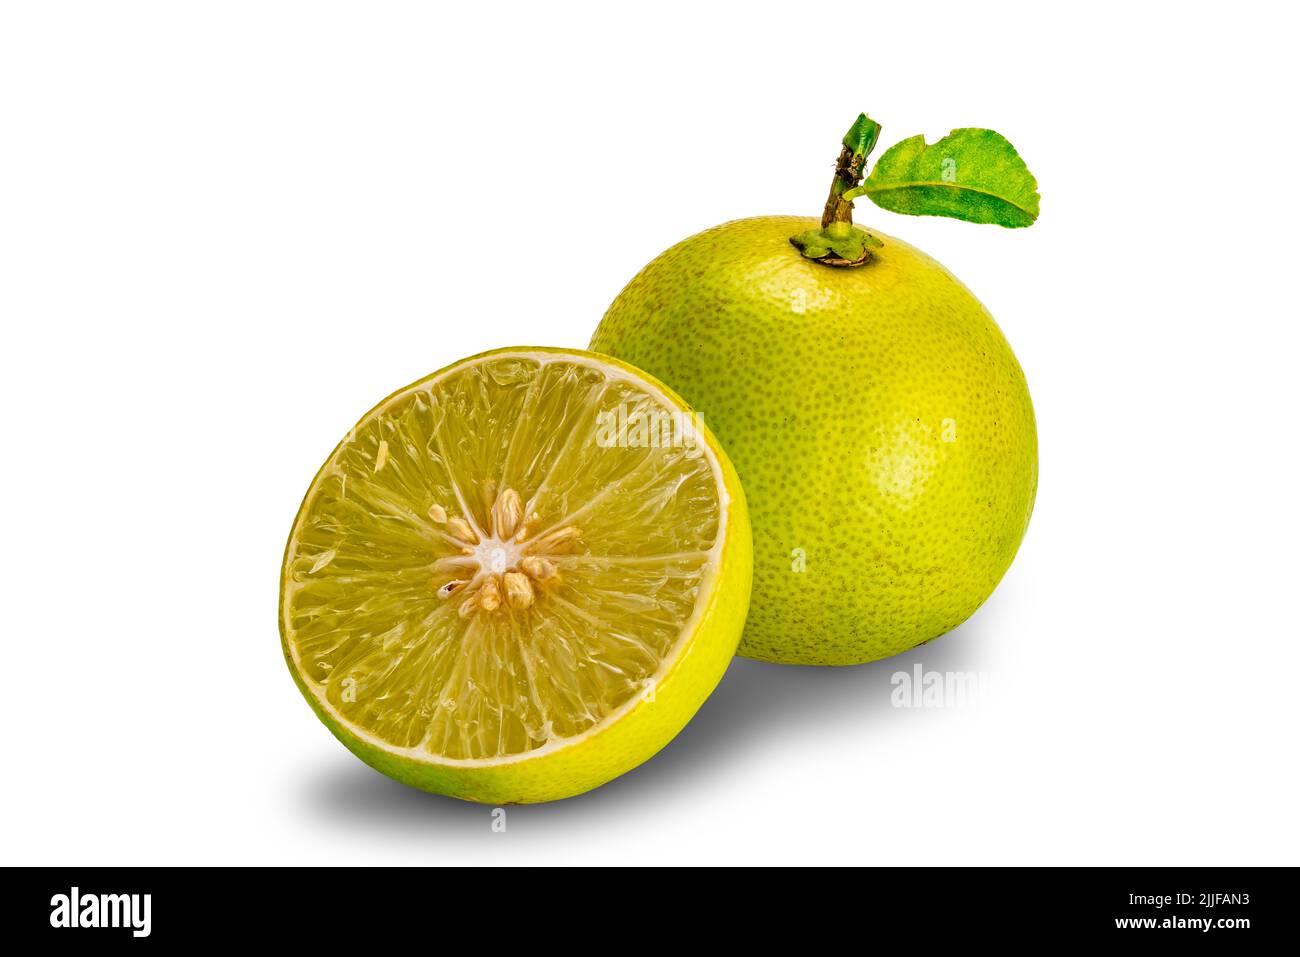 A half and a whole ripe lemon with green leaf isolated on white background with clipping path. Stock Photo